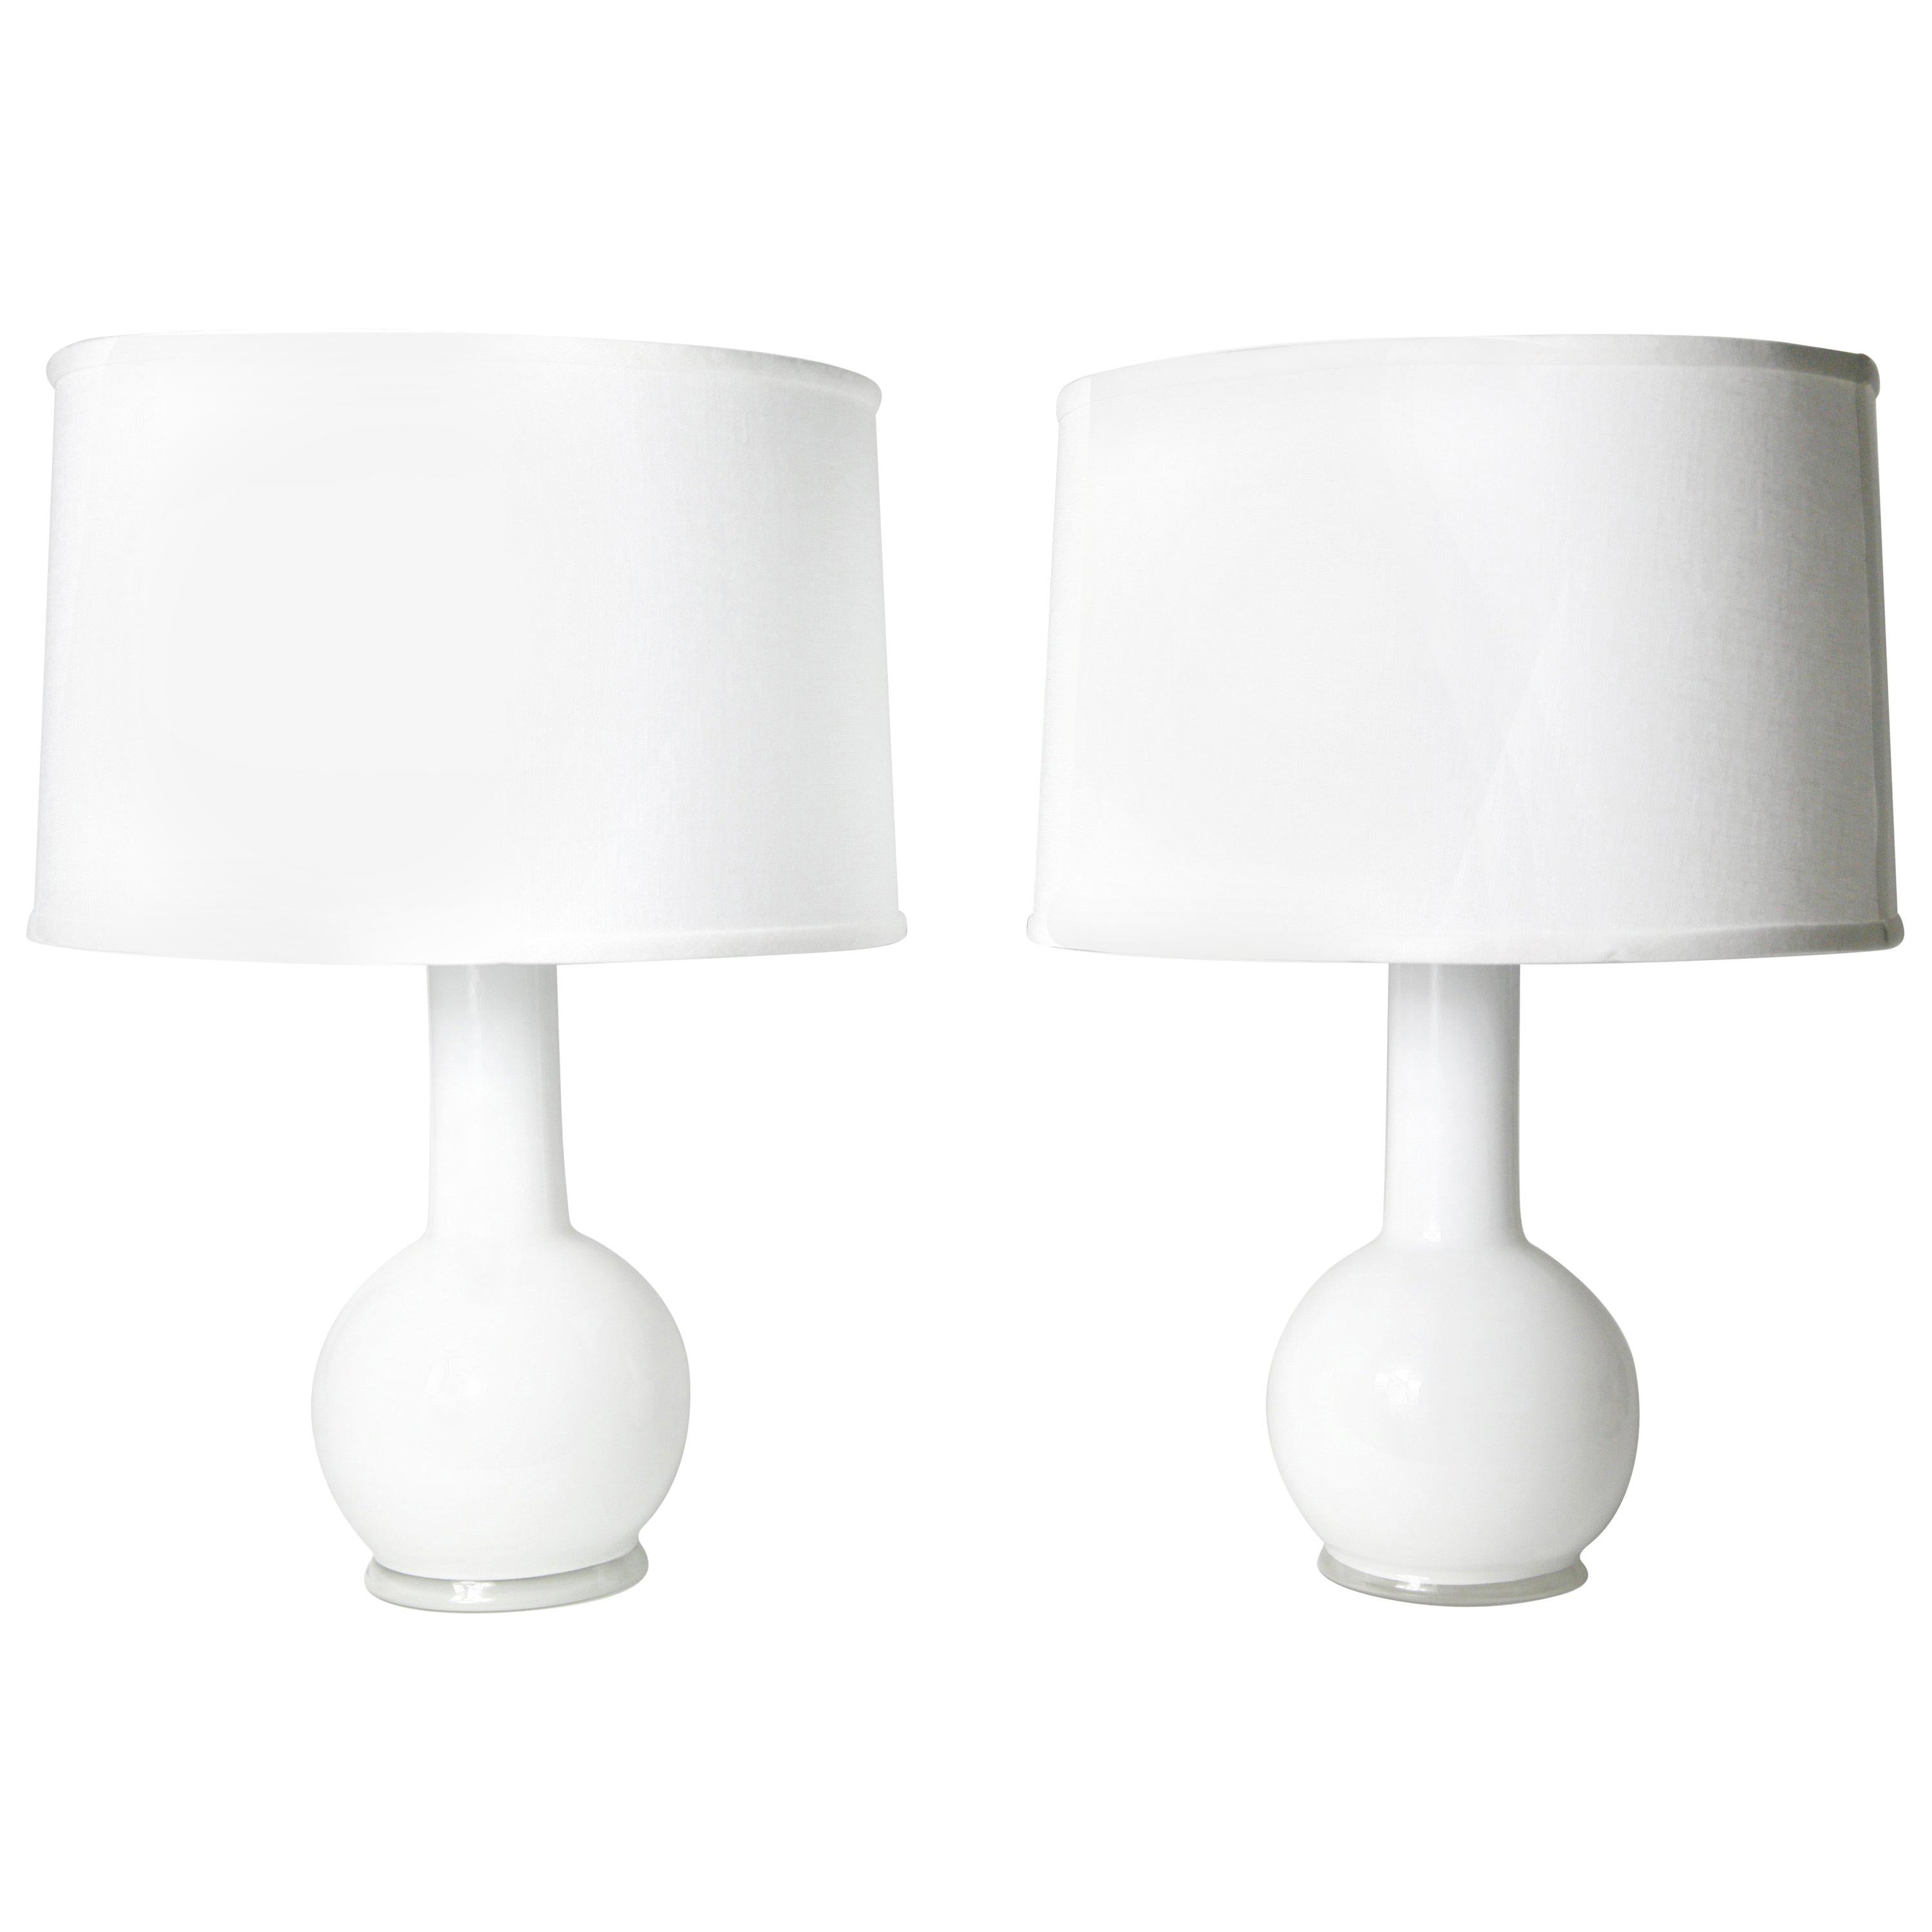 Pair of white dual layered glass lamps by Luxus lighting, Sweden, 1980
Beautiful round white glass bases encased in an outer layer of clear glass great size and body in a timeless manner.

Rewired for the US.
Shades not included.